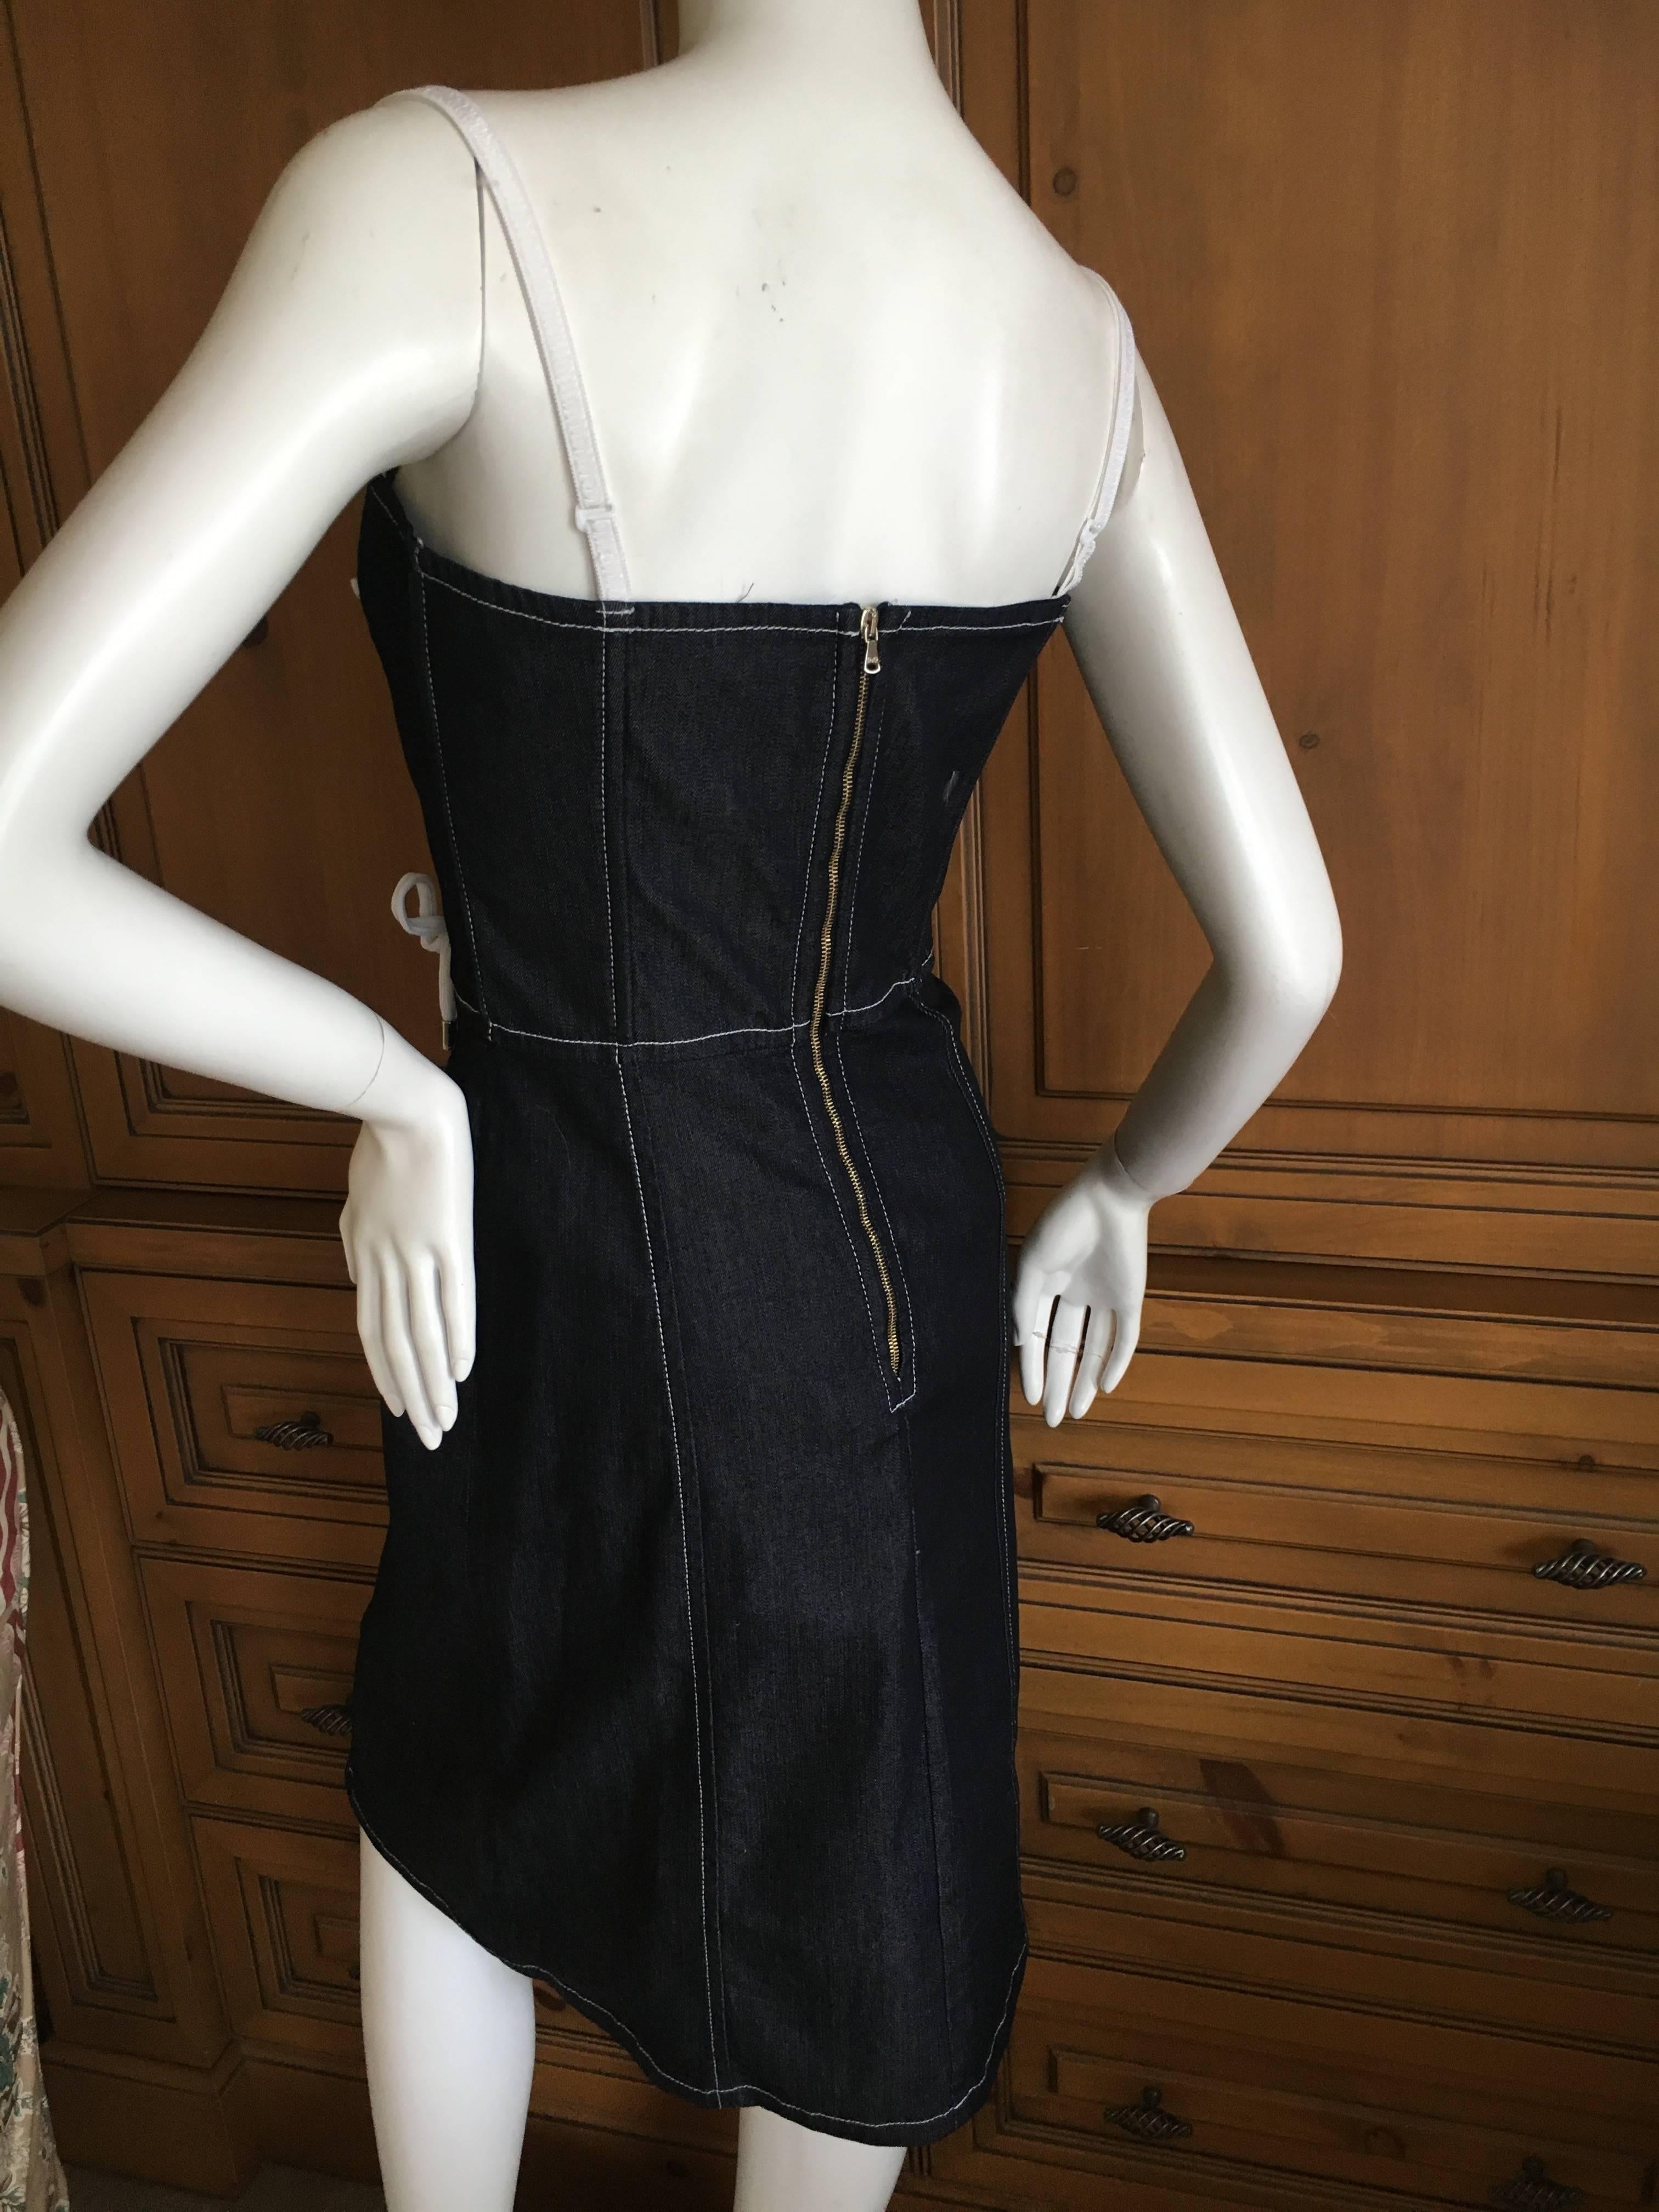 D&G Dolce & Gabbana Denim Dress with Corset Lace Up Details In Excellent Condition For Sale In Cloverdale, CA